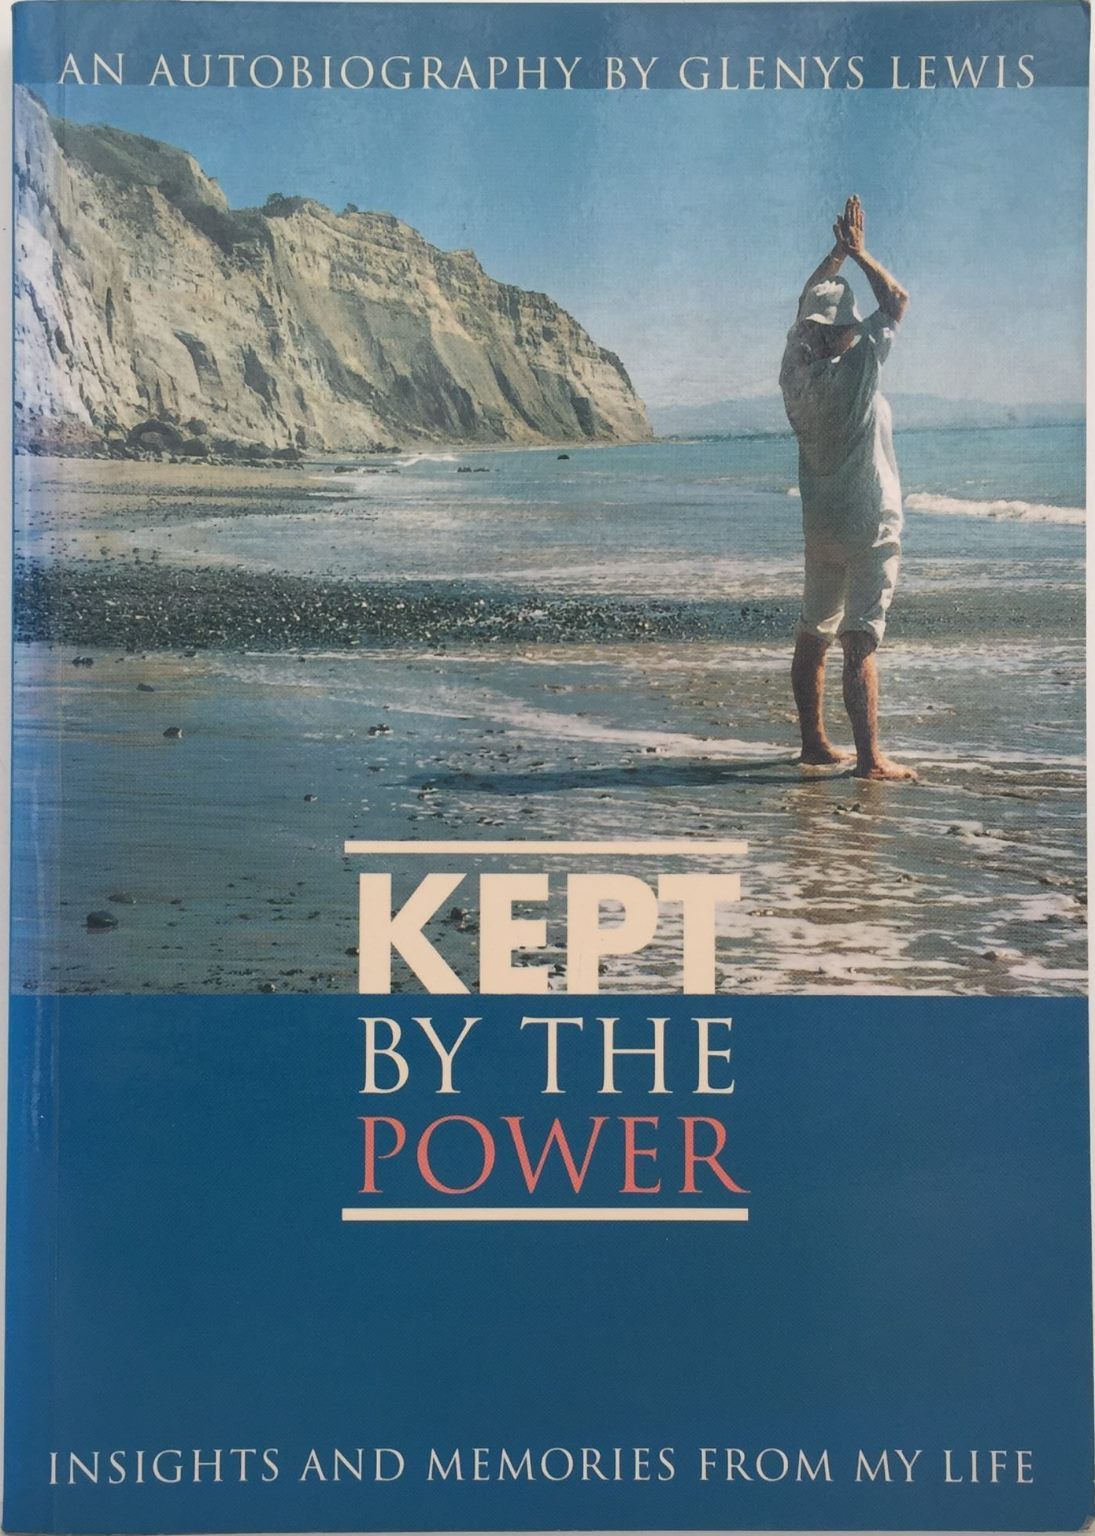 KEPT BY THE POWER